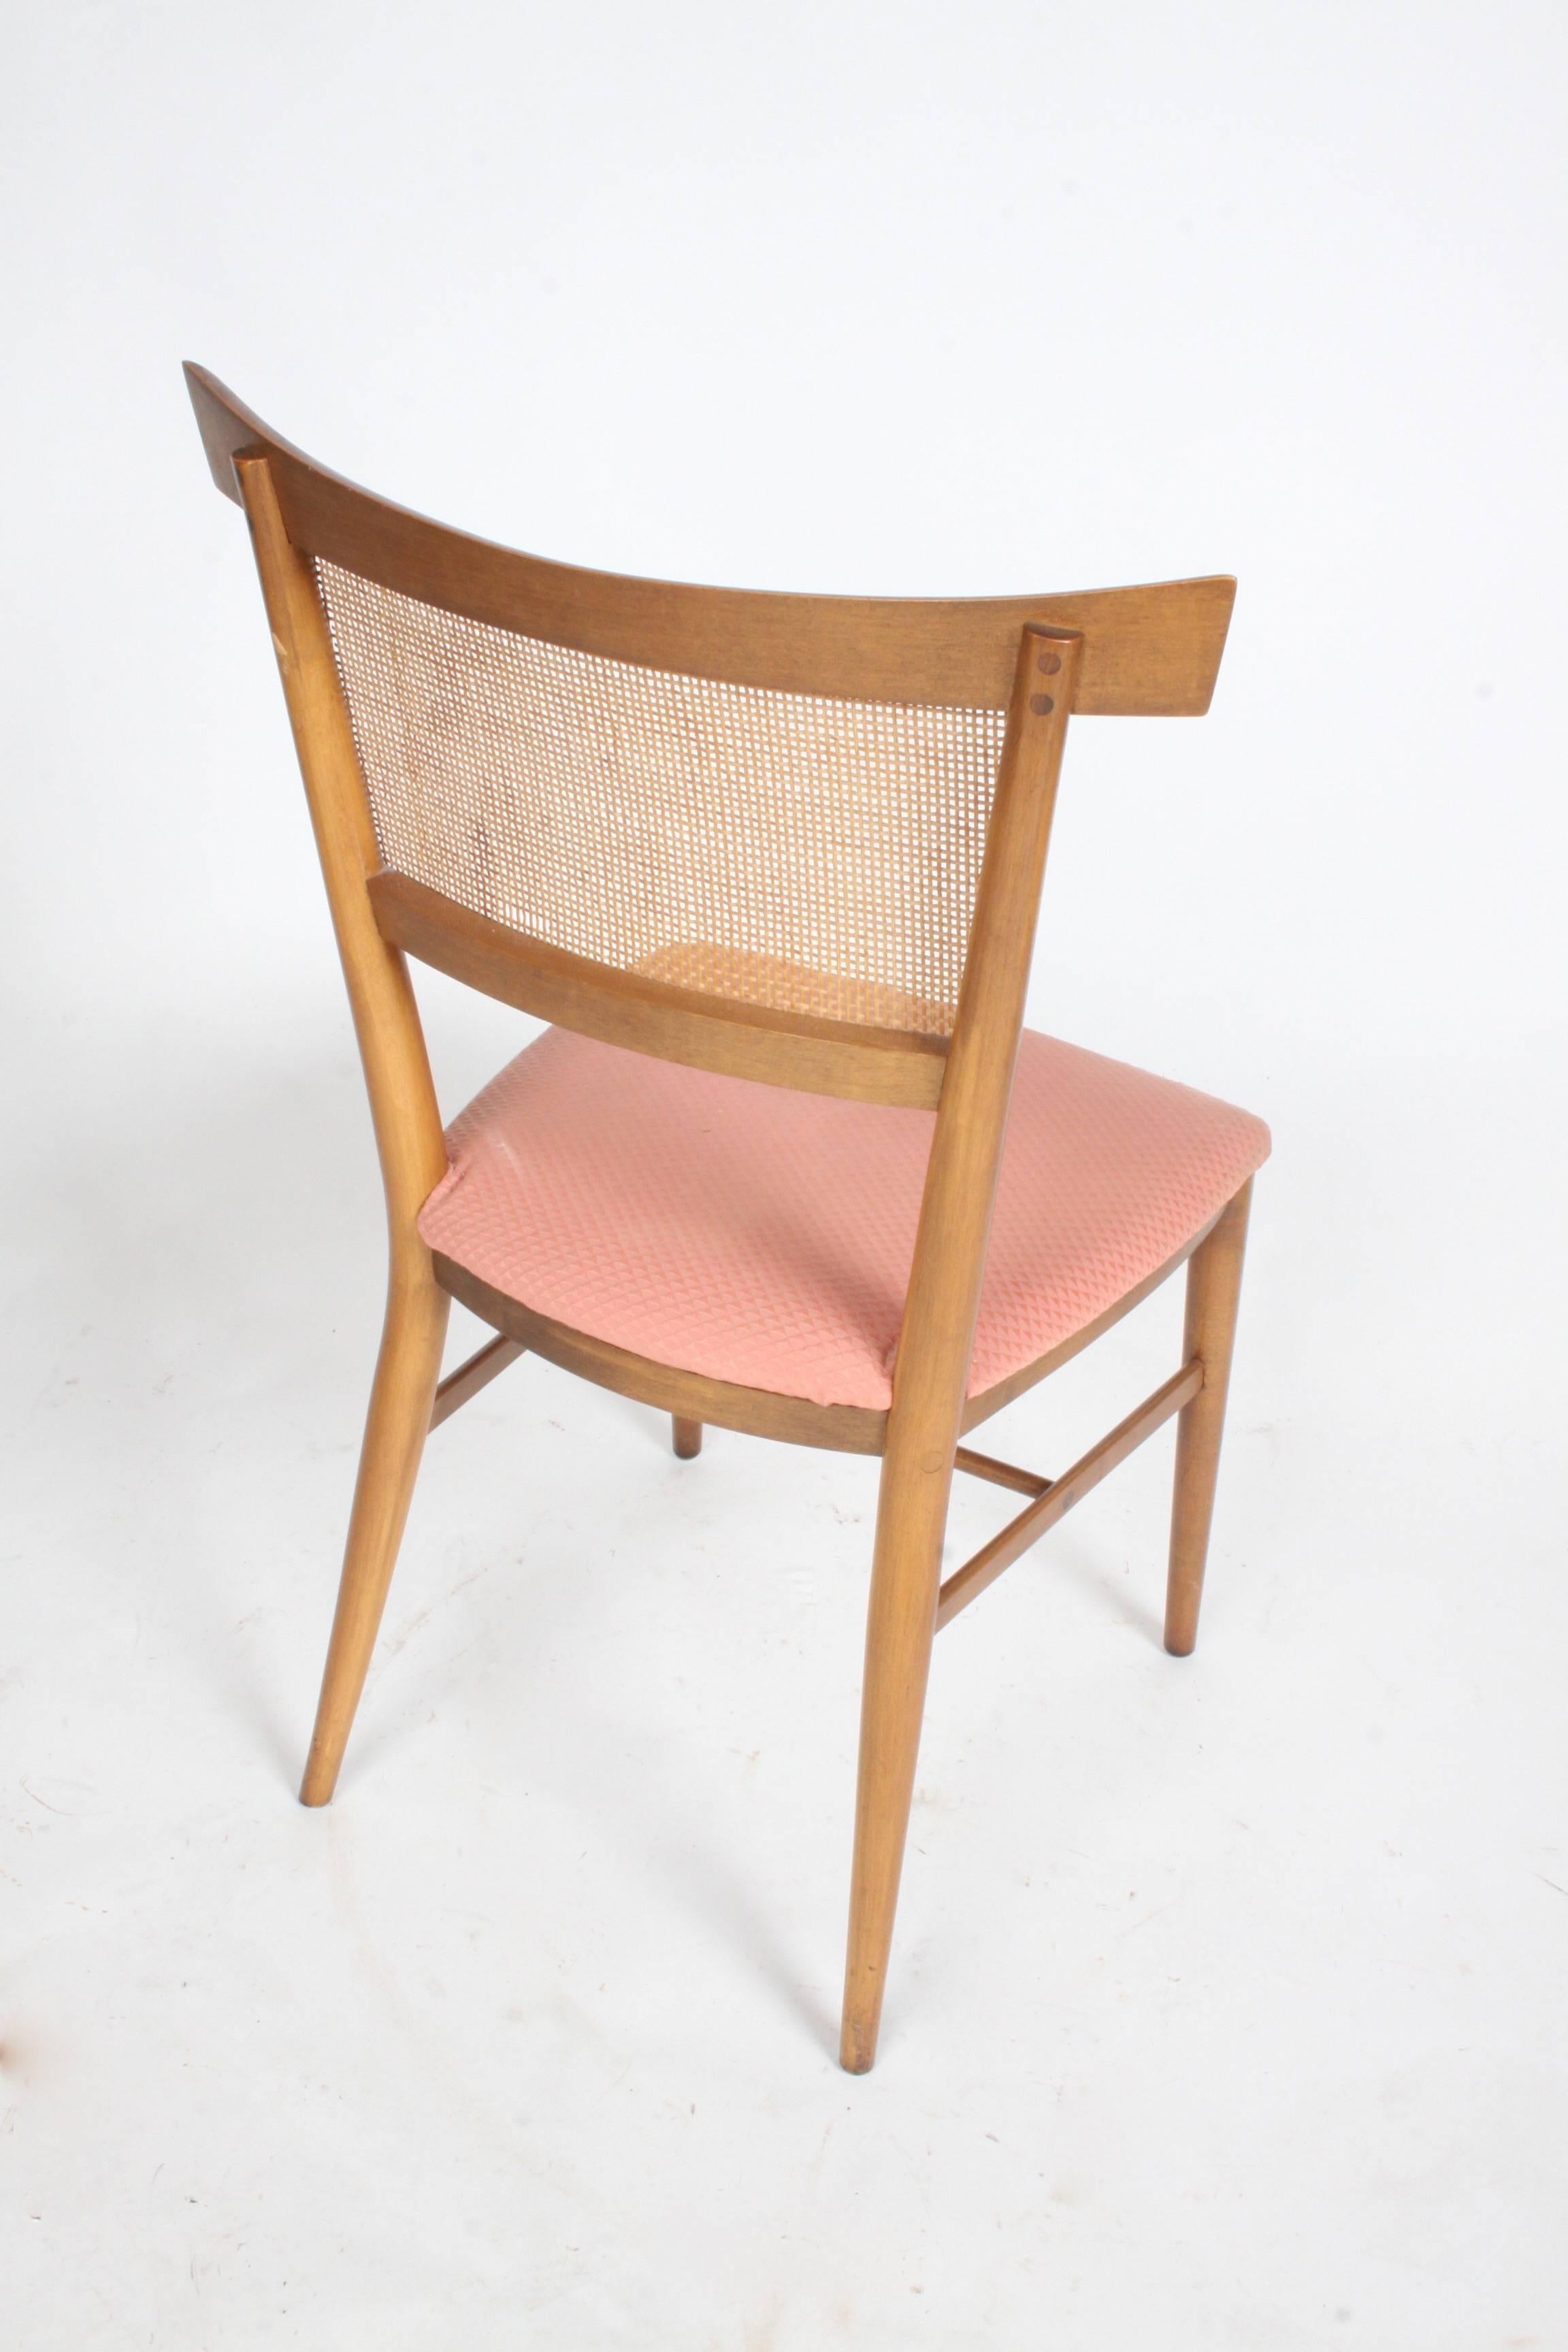 Set of four Paul McCobb for Winchendon Perimeter Group bow tie dining chairs in original finish. Upholstery has stains, not original. Some minor loss to cane, can be repaired for additional cost. Also, set can be refinished in a dark espresso like